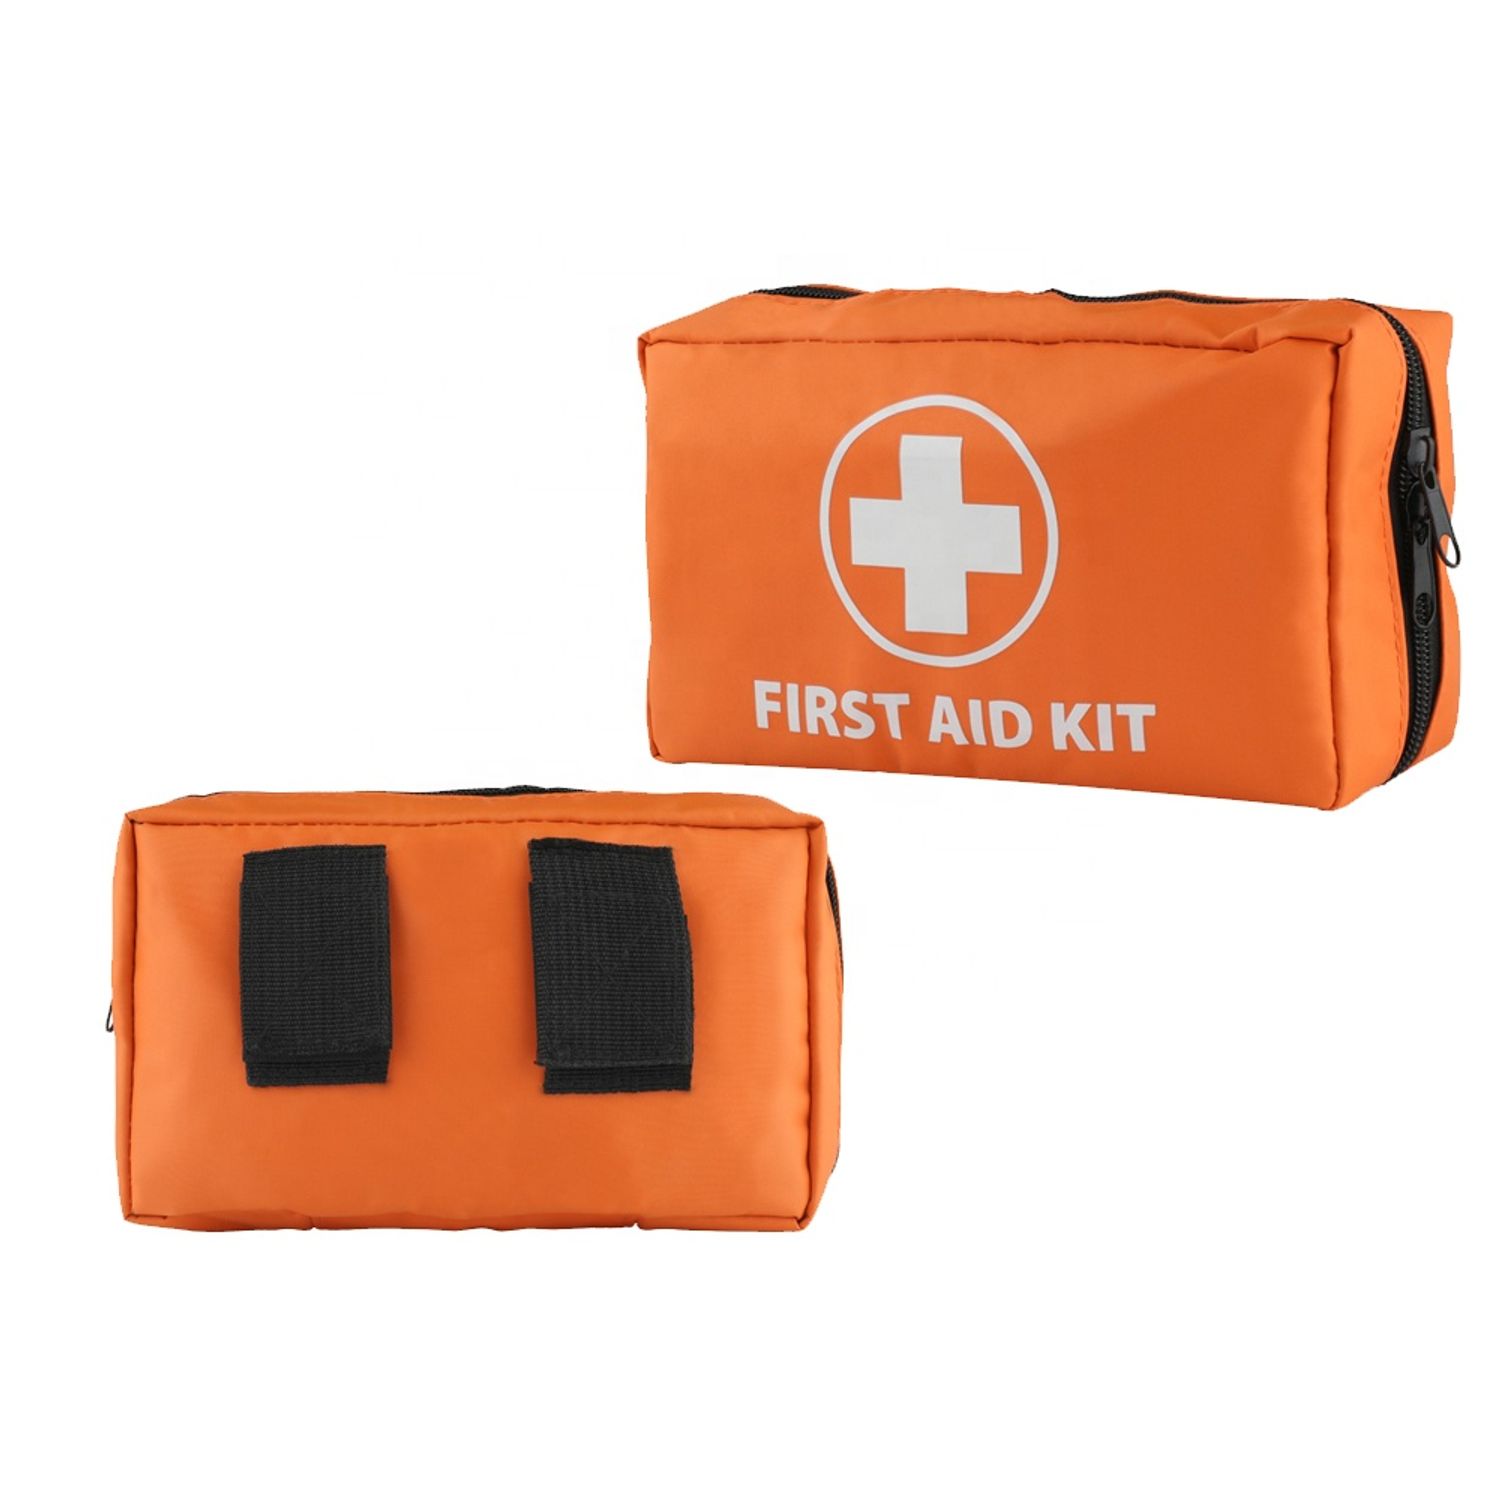 front and back display of orange first aid kit